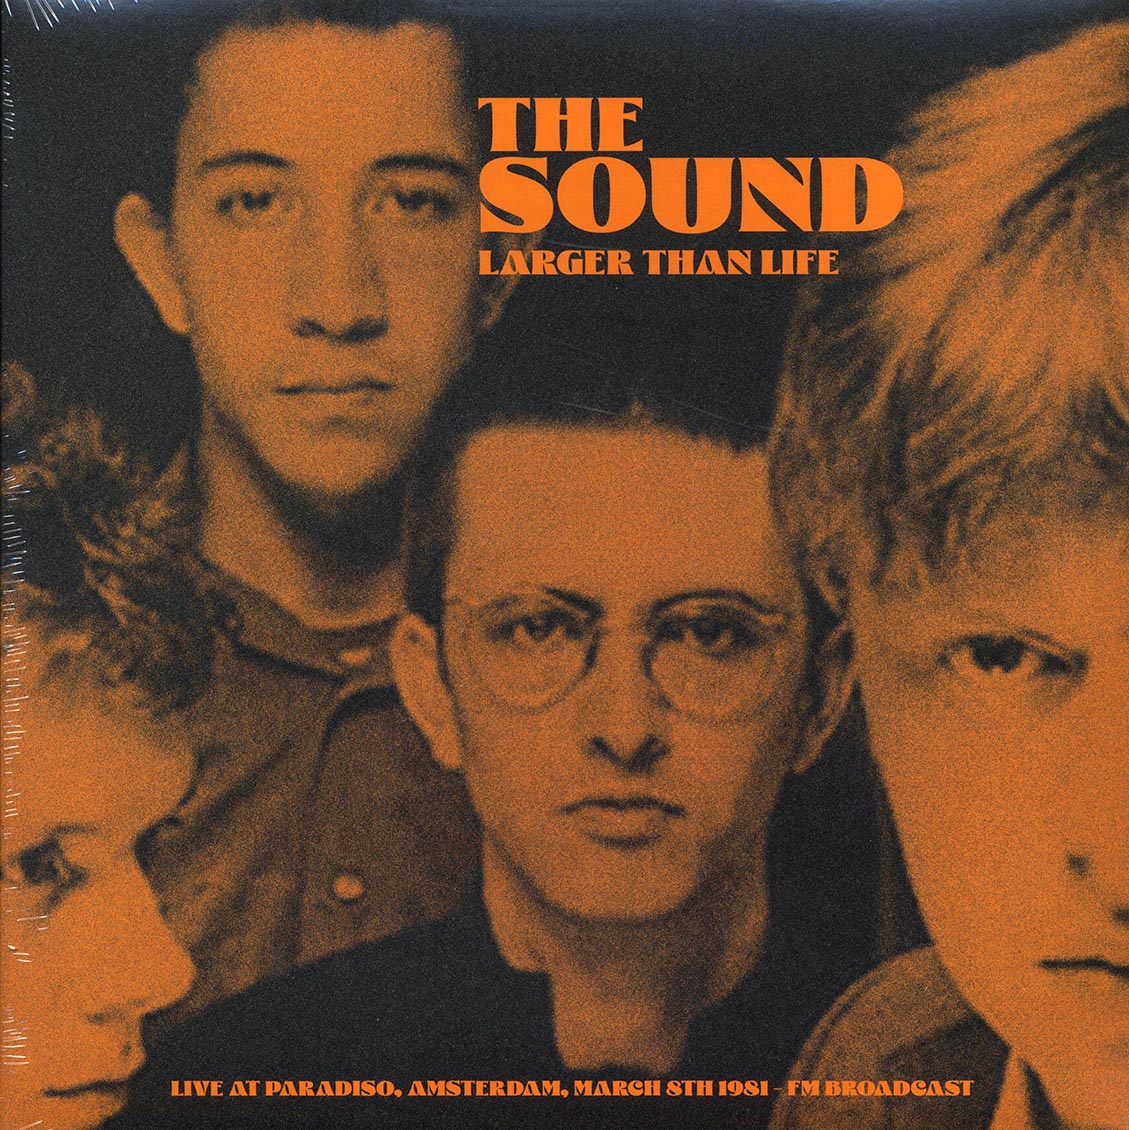 The Sound - Larger Than Life: Live At Paradiso, Amsterdam, March 8, 1981 - Vinyl LP